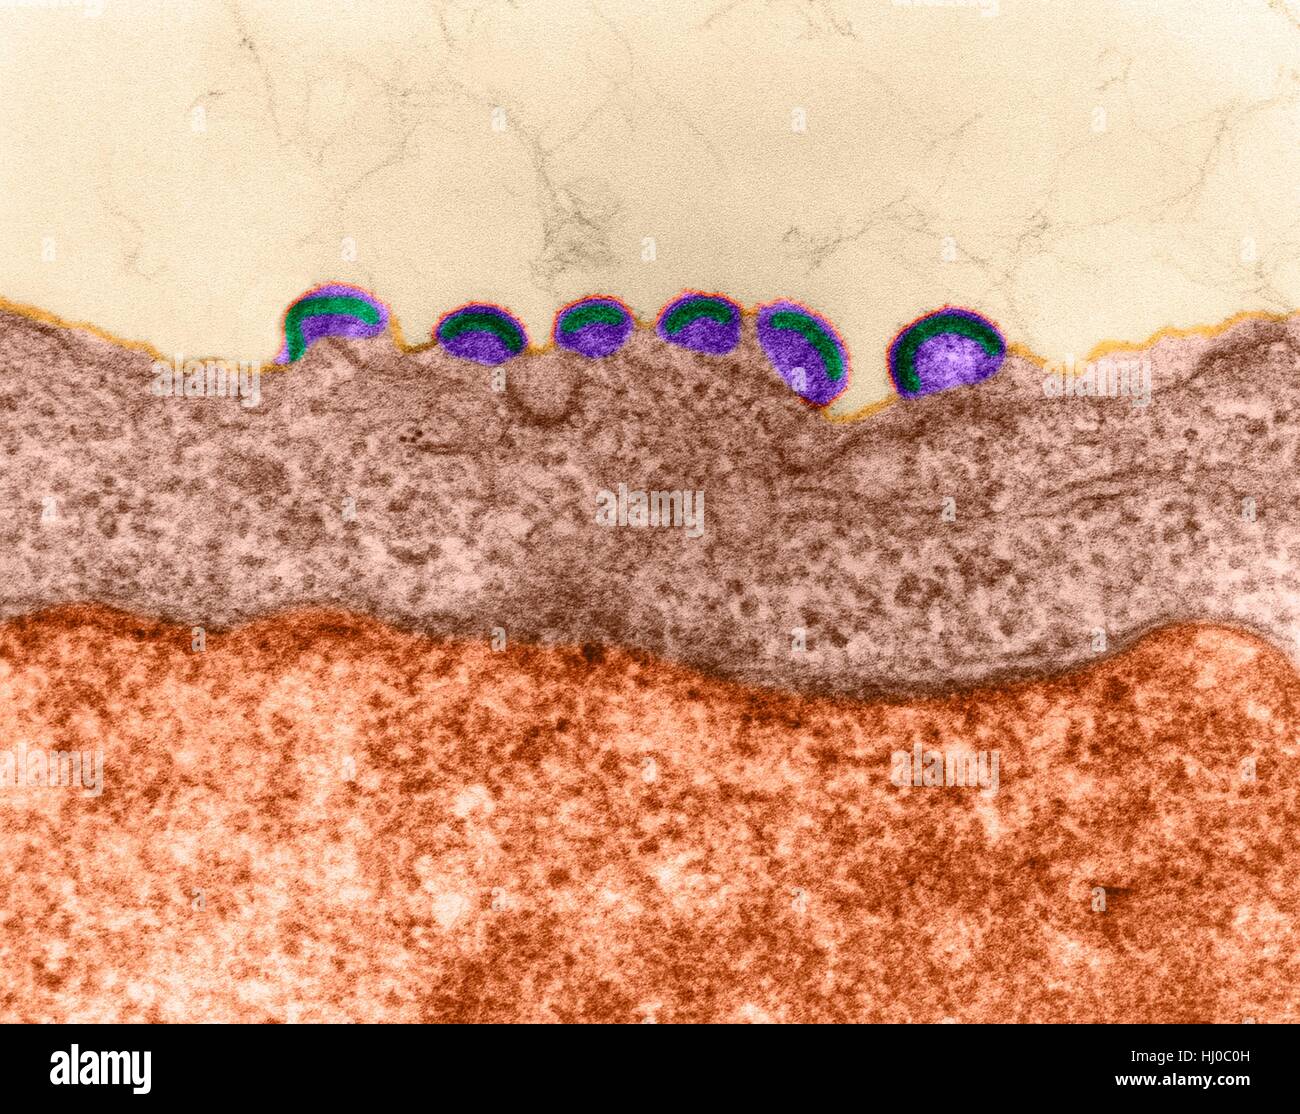 HIV infection,coloured transmission electron micrograph (TEM).Mature virus budding release of HIV in human lymph tissue (RNA virus,Retroviridae Family).In retroviruses nucleocapsid buds directly through cytoplasmic membrane.This produces enveloped virion during release process.HIV (human Stock Photo